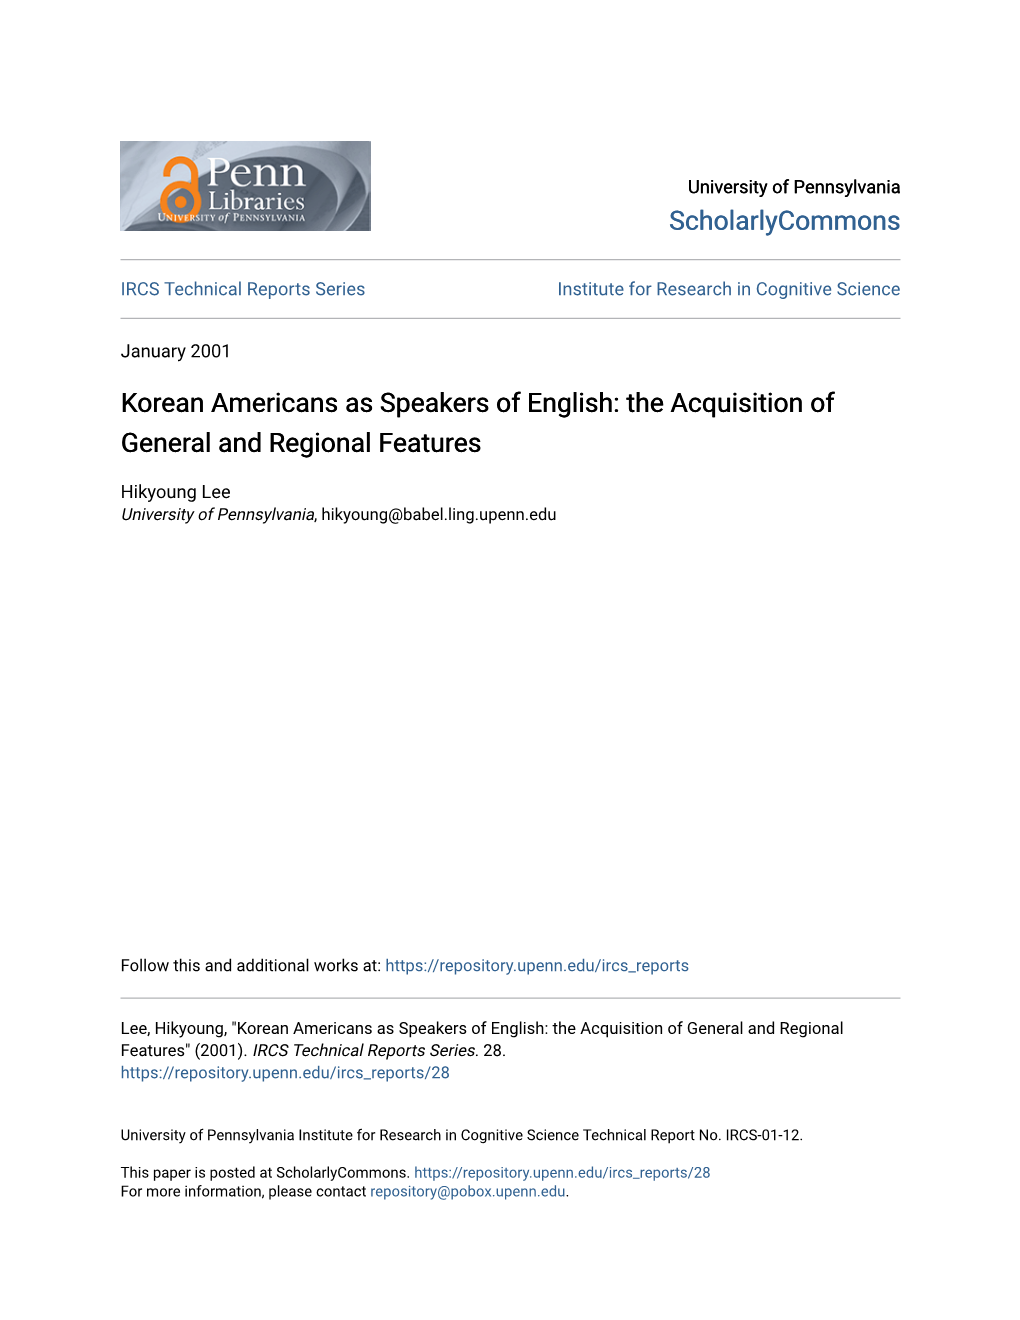 Korean Americans As Speakers of English: the Acquisition of General and Regional Features